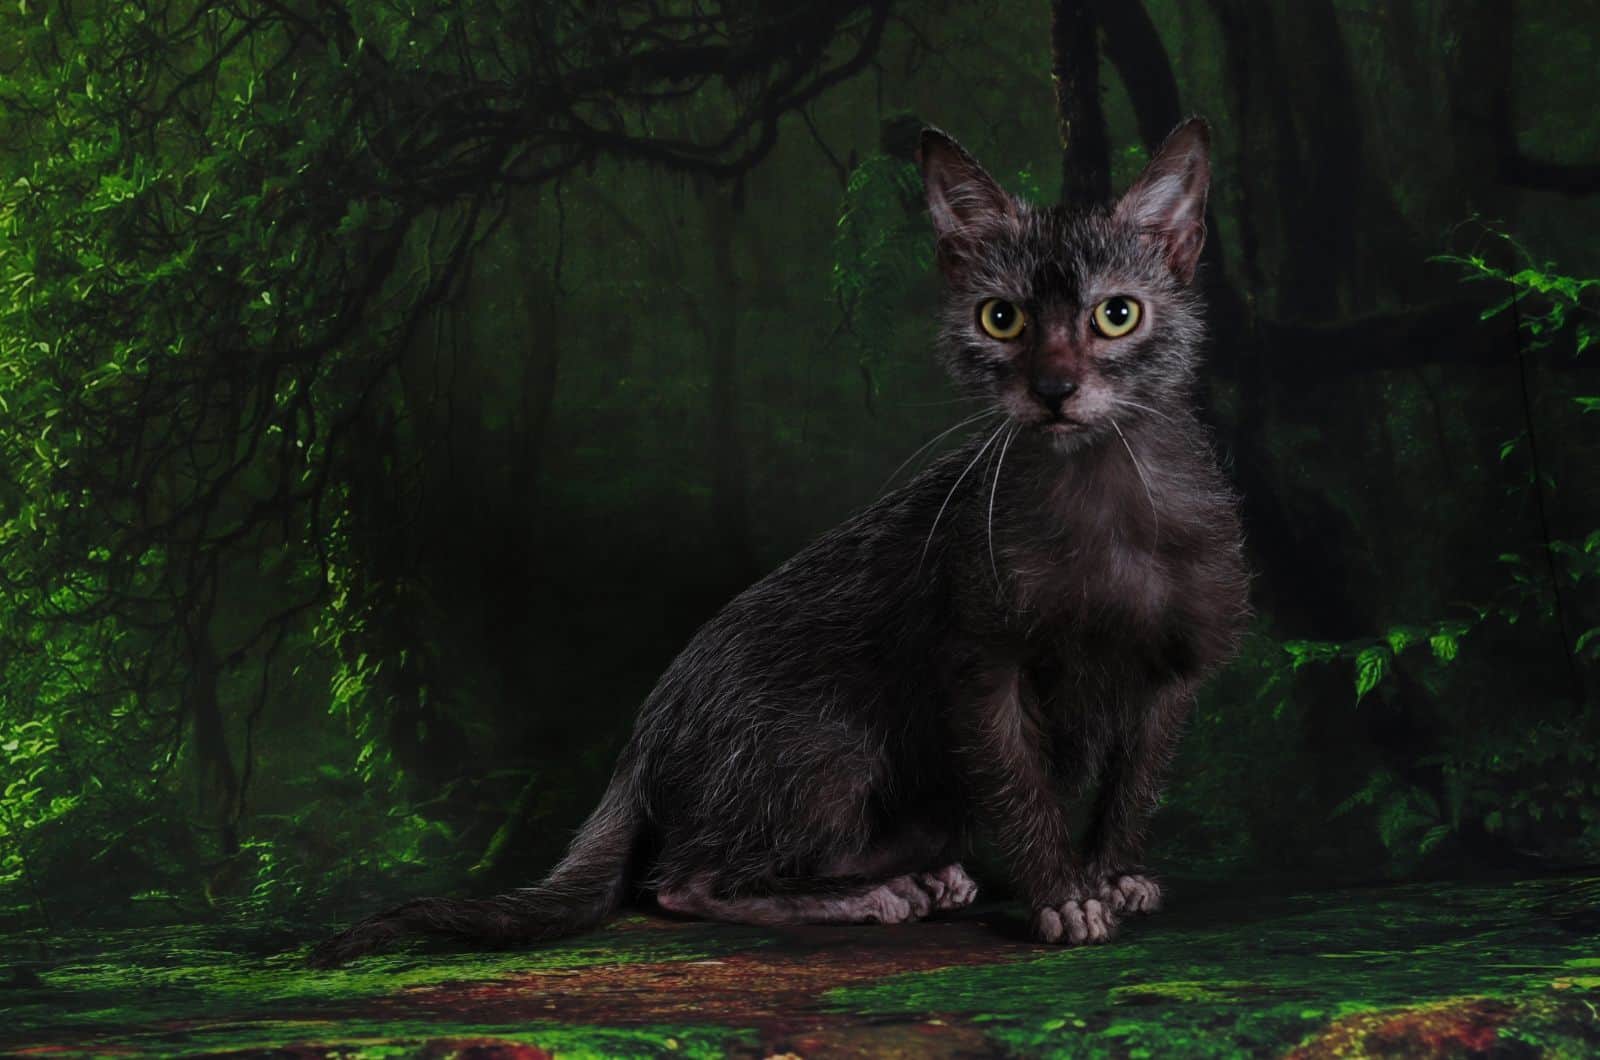 Lykoi Cat sitting in nature posing for camera